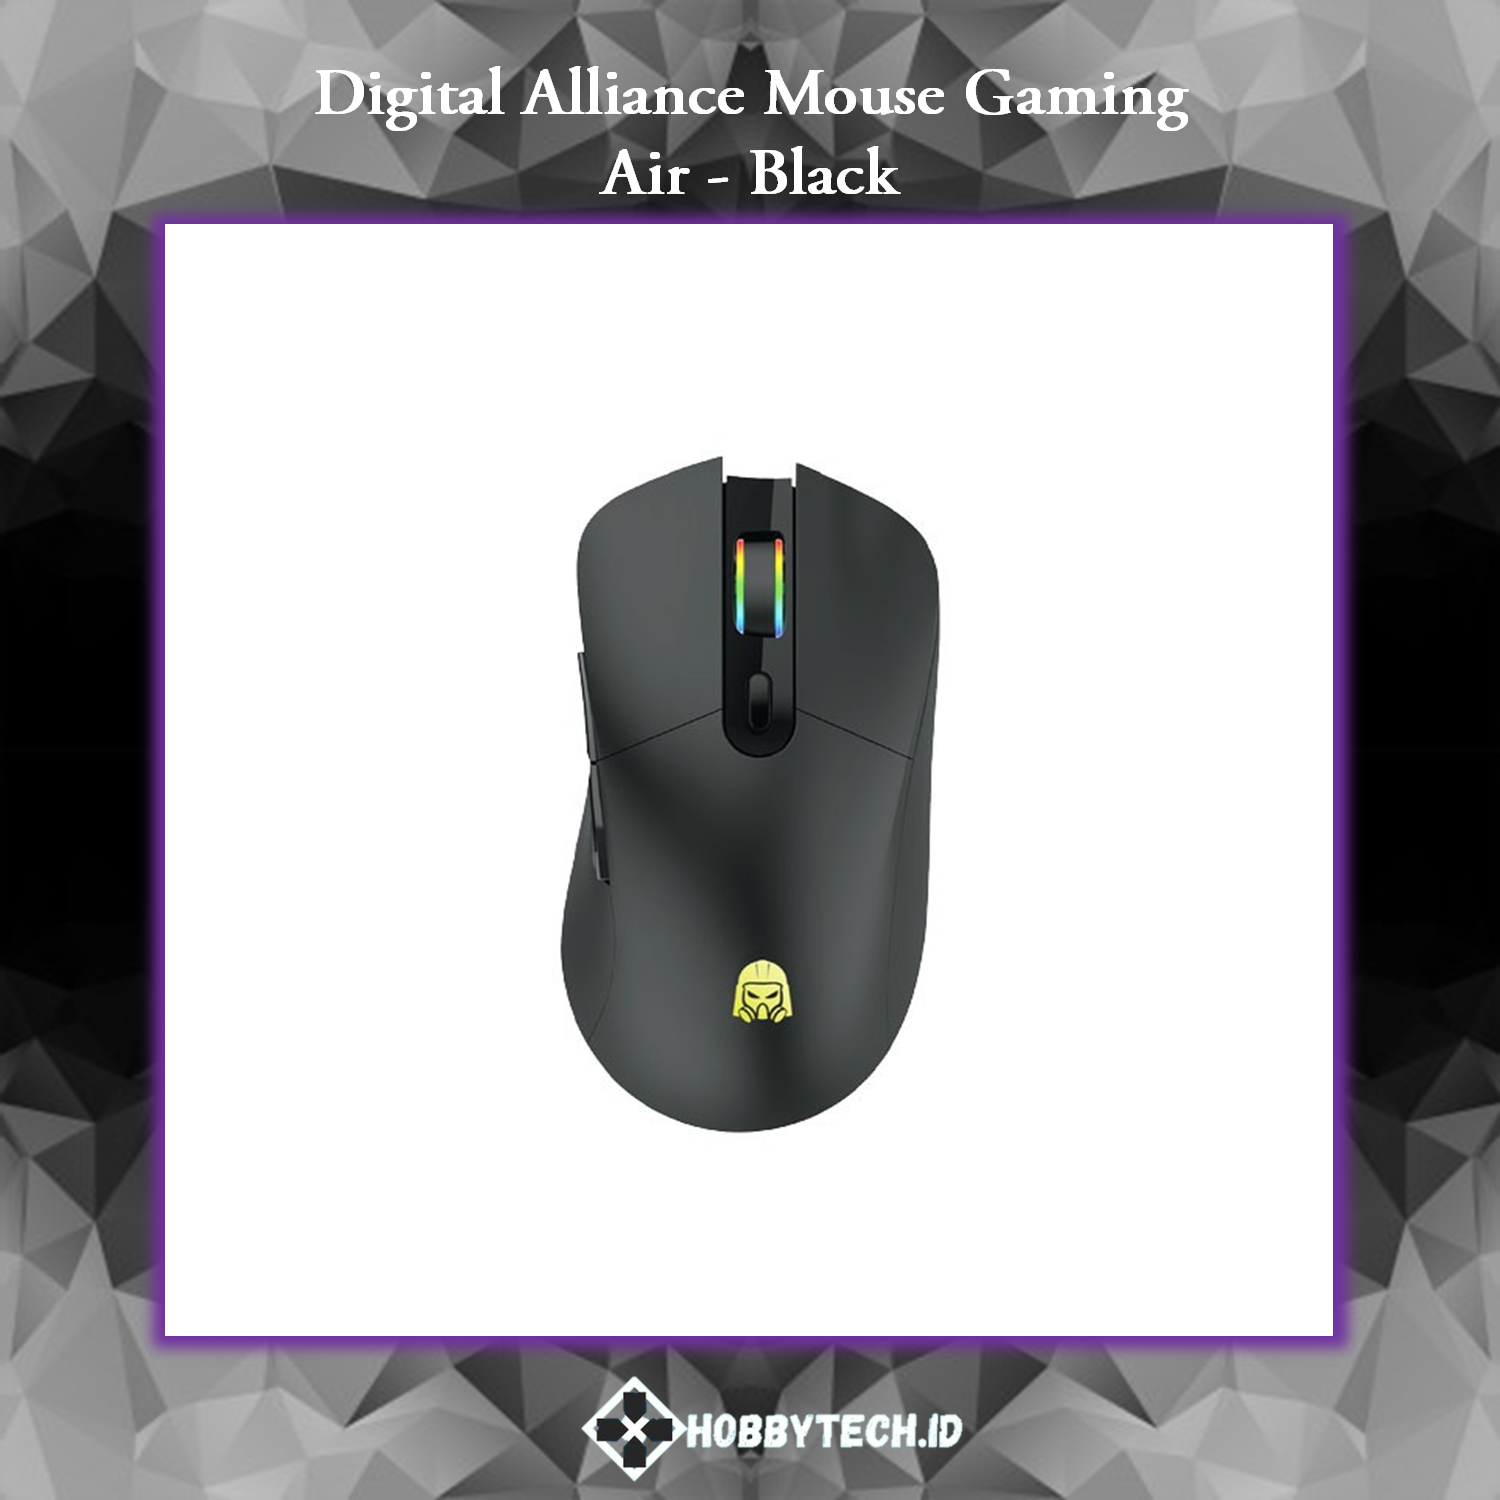 Digital Alliance Gaming Mouse Air Black